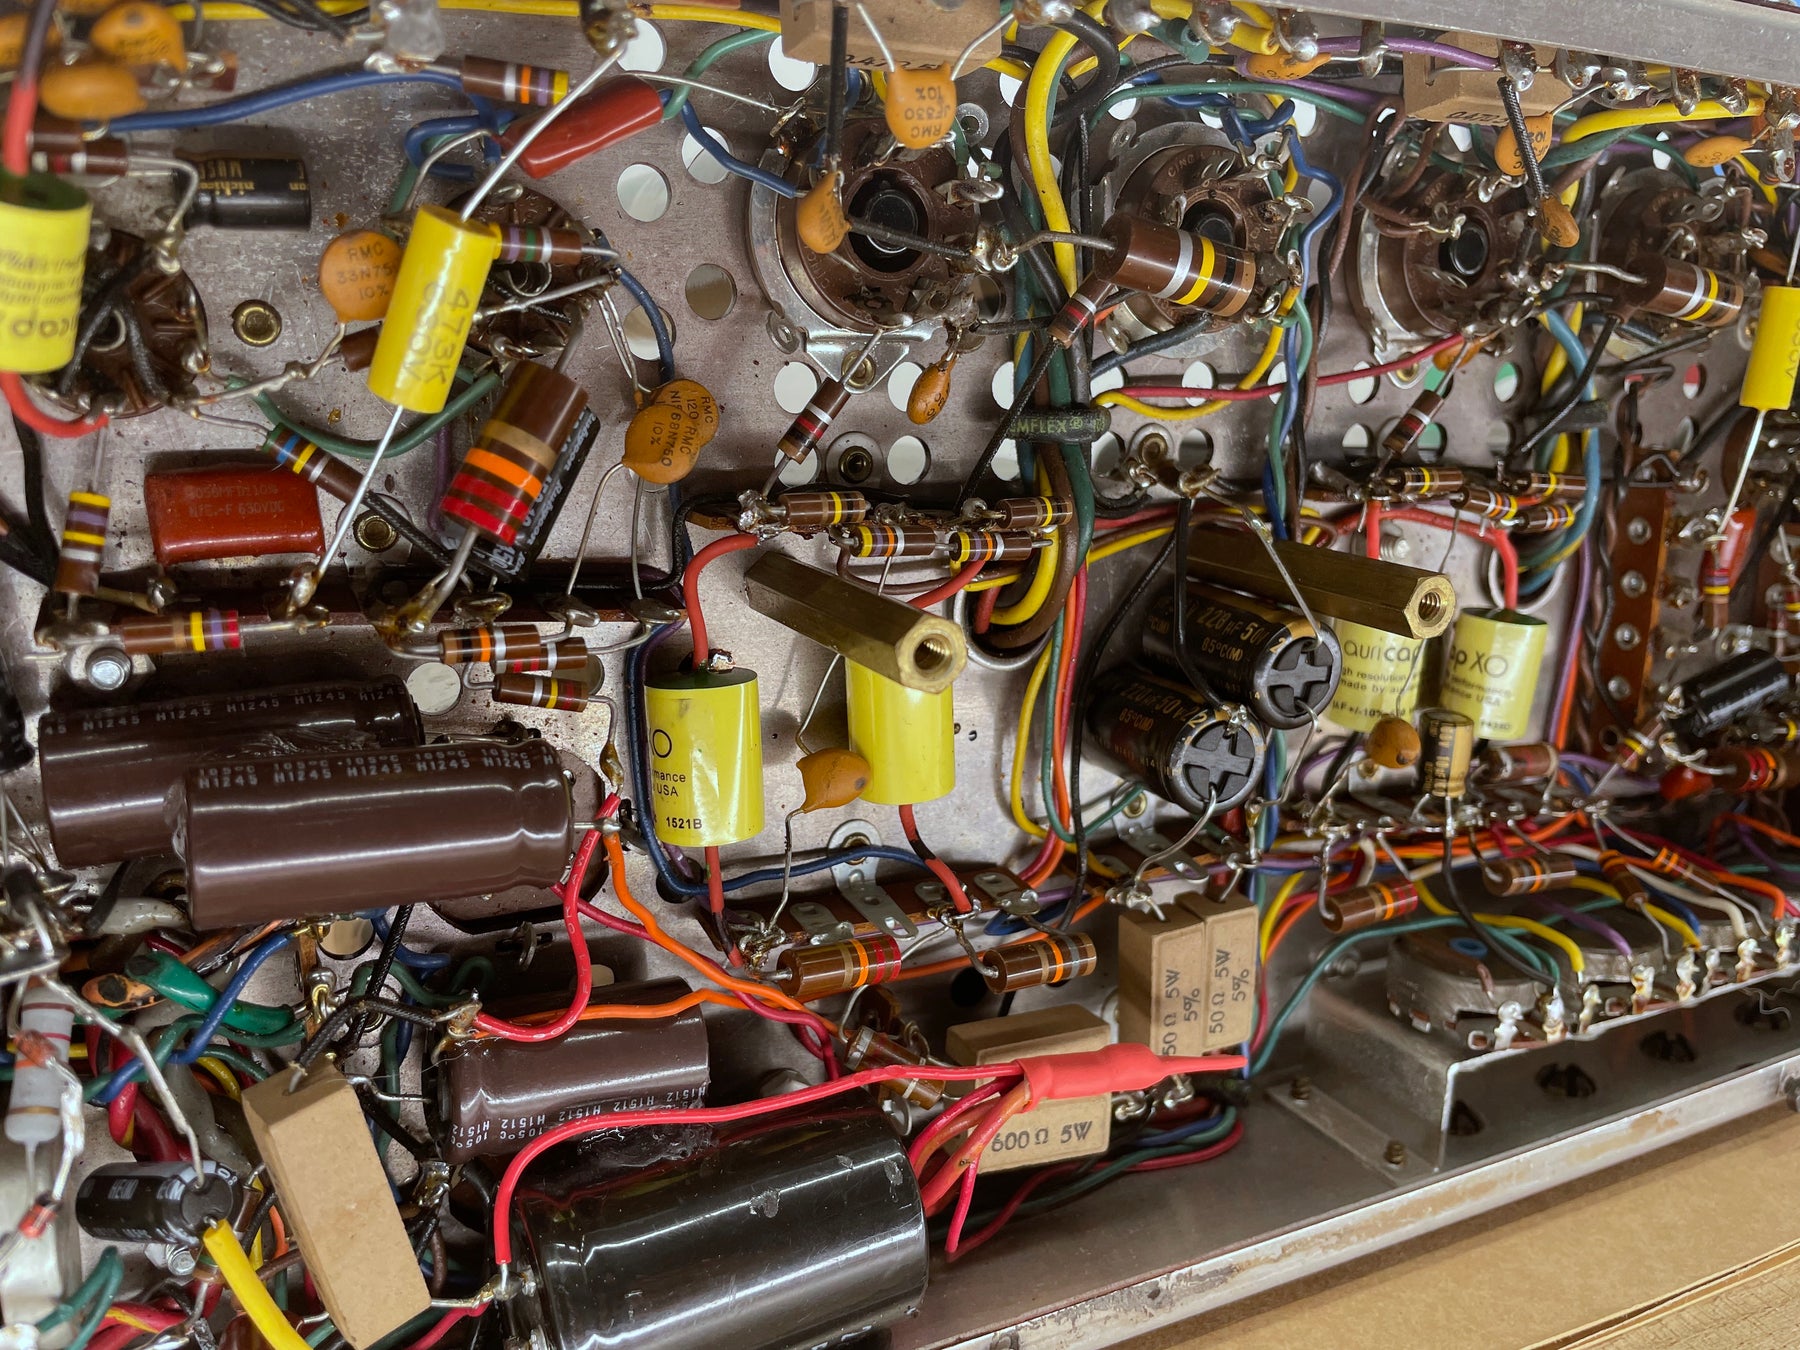 Fisher SA-300 Tube Amplifier.  Recent restoration with high-end components.